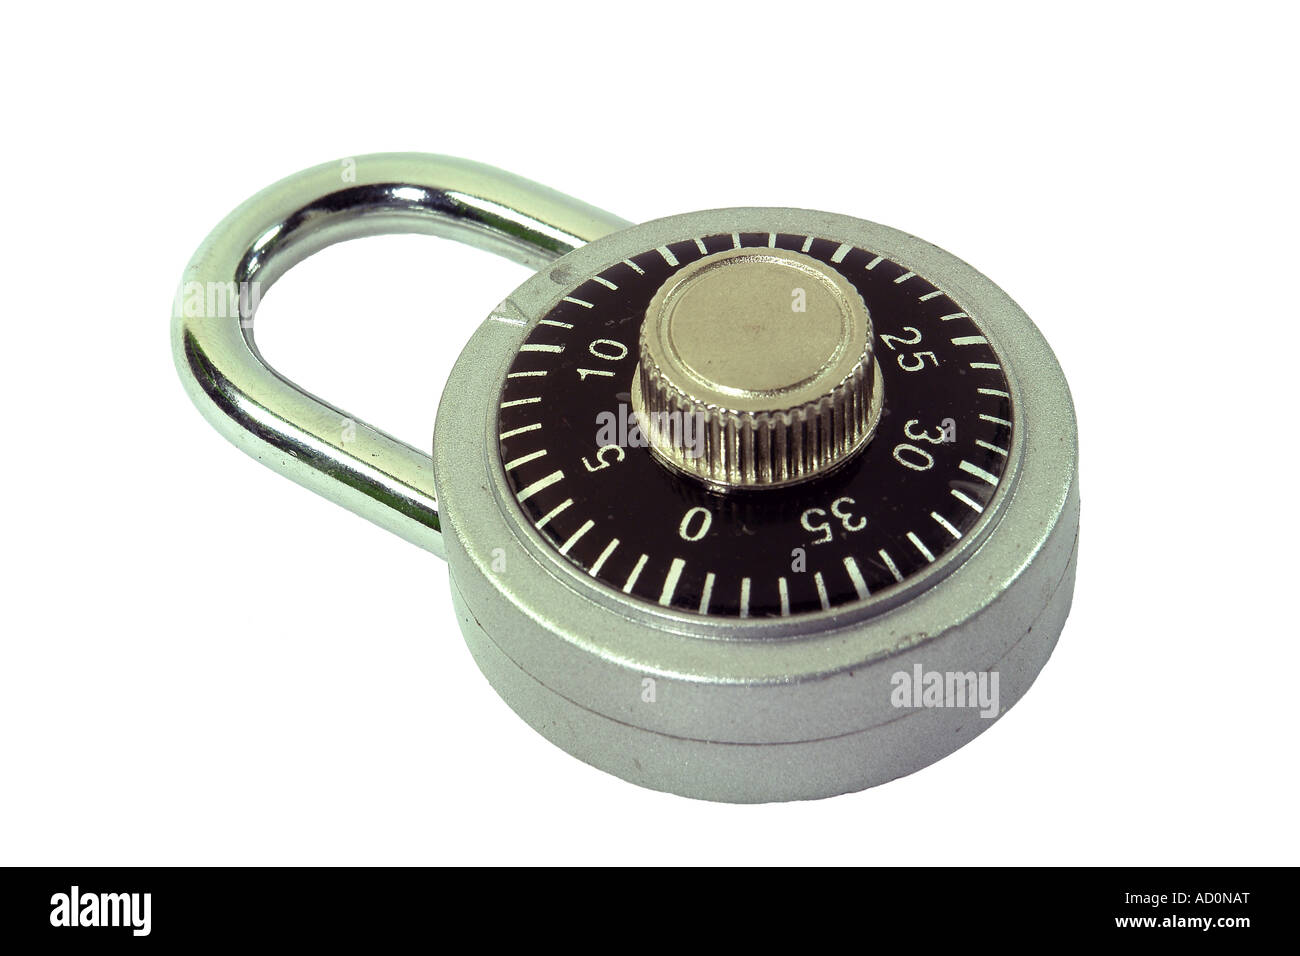 lock as symbol for barriers obstruction security internet security Firewall and so on Stock Photo